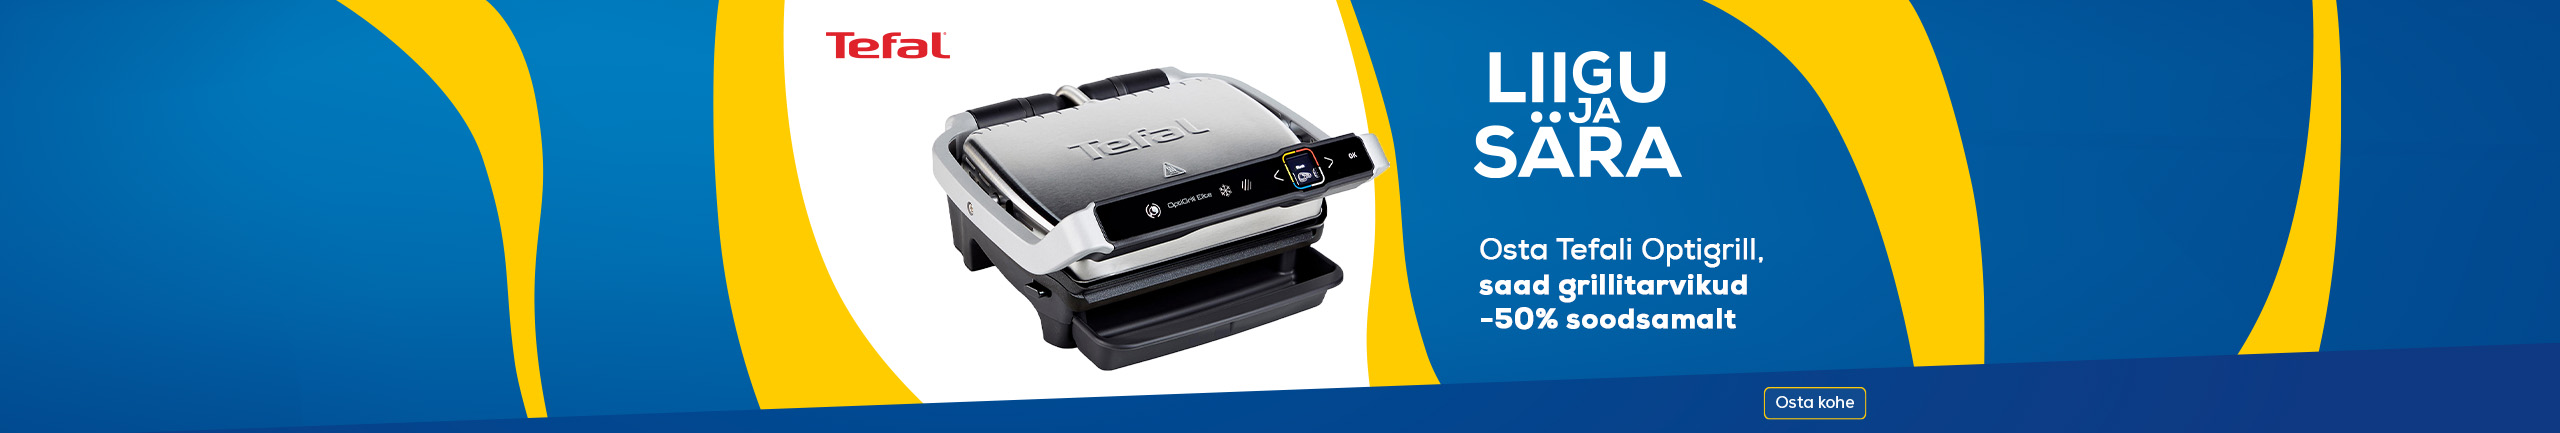 Move and Shine! Buy Tefal Optigrill, get grill accessories -50% 